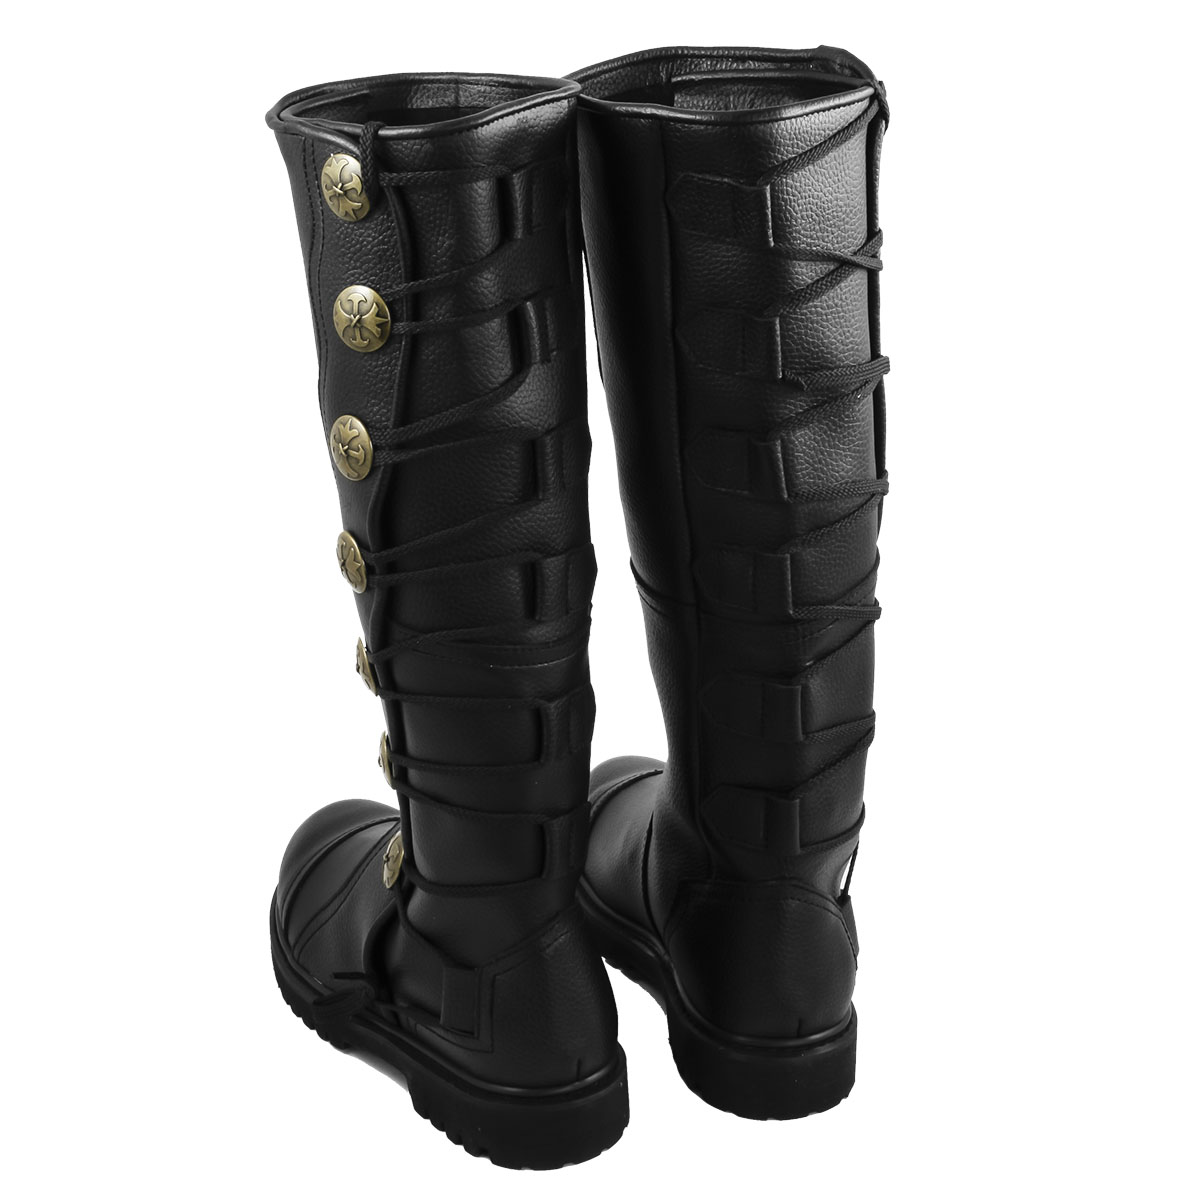 Comfortable and Durable Knee High Premium Leather Boots